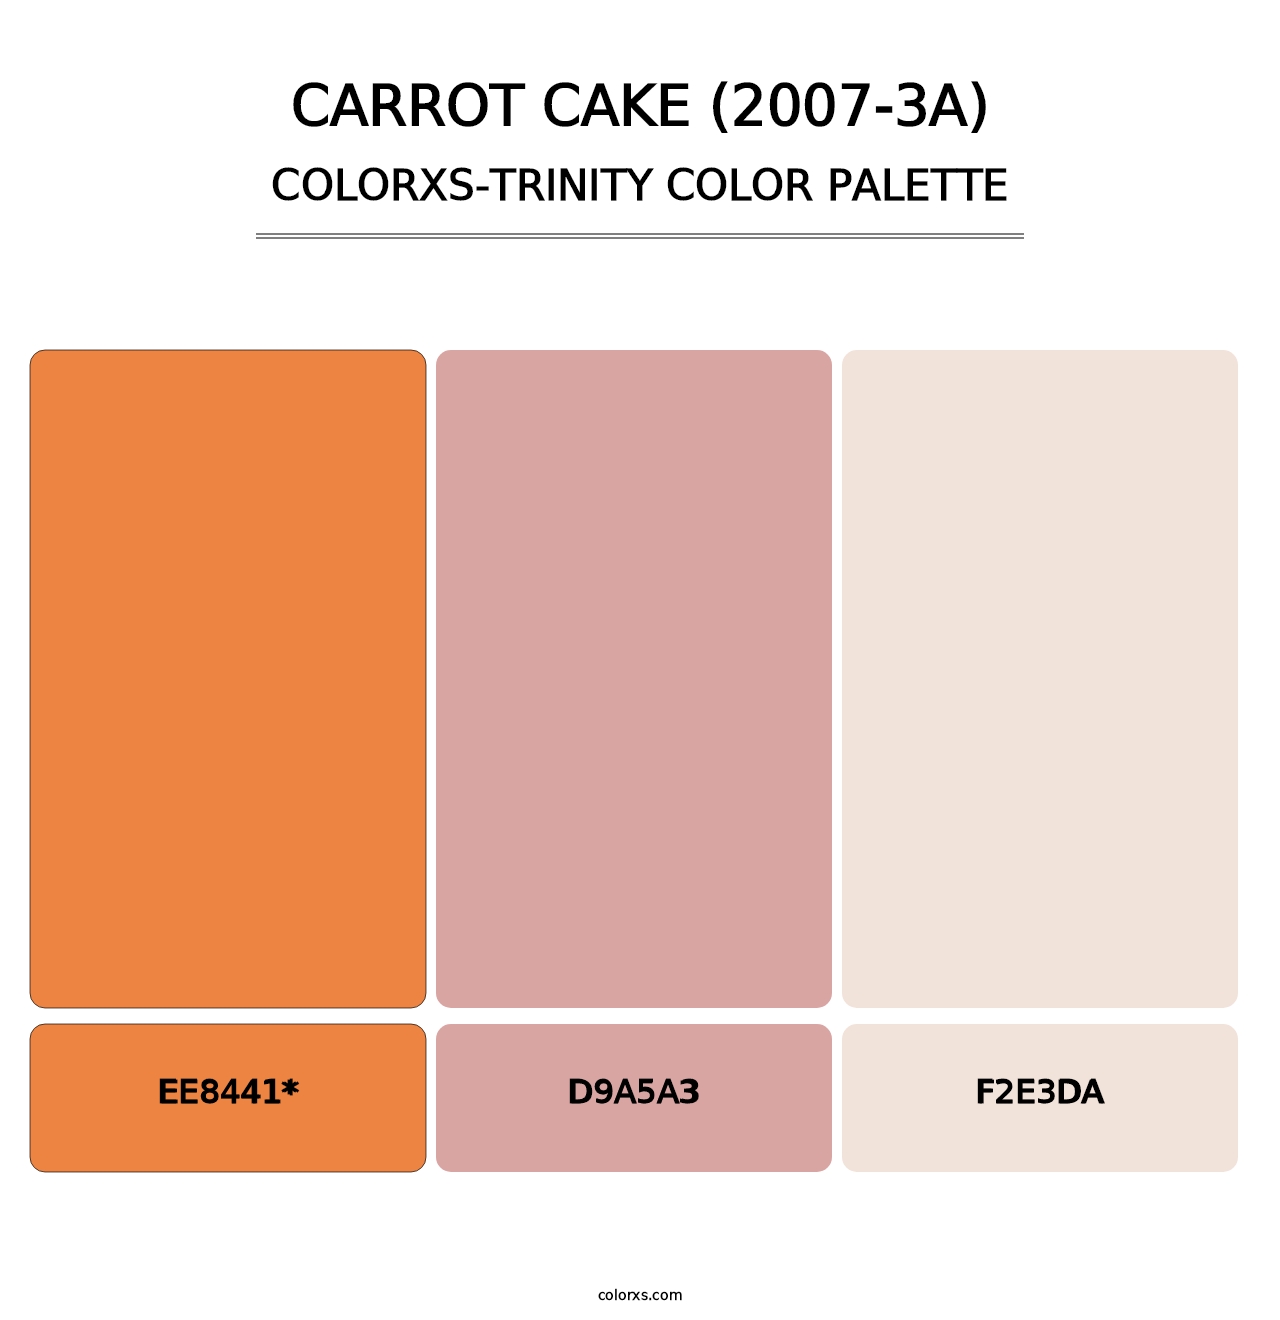 Carrot Cake (2007-3A) - Colorxs Trinity Palette